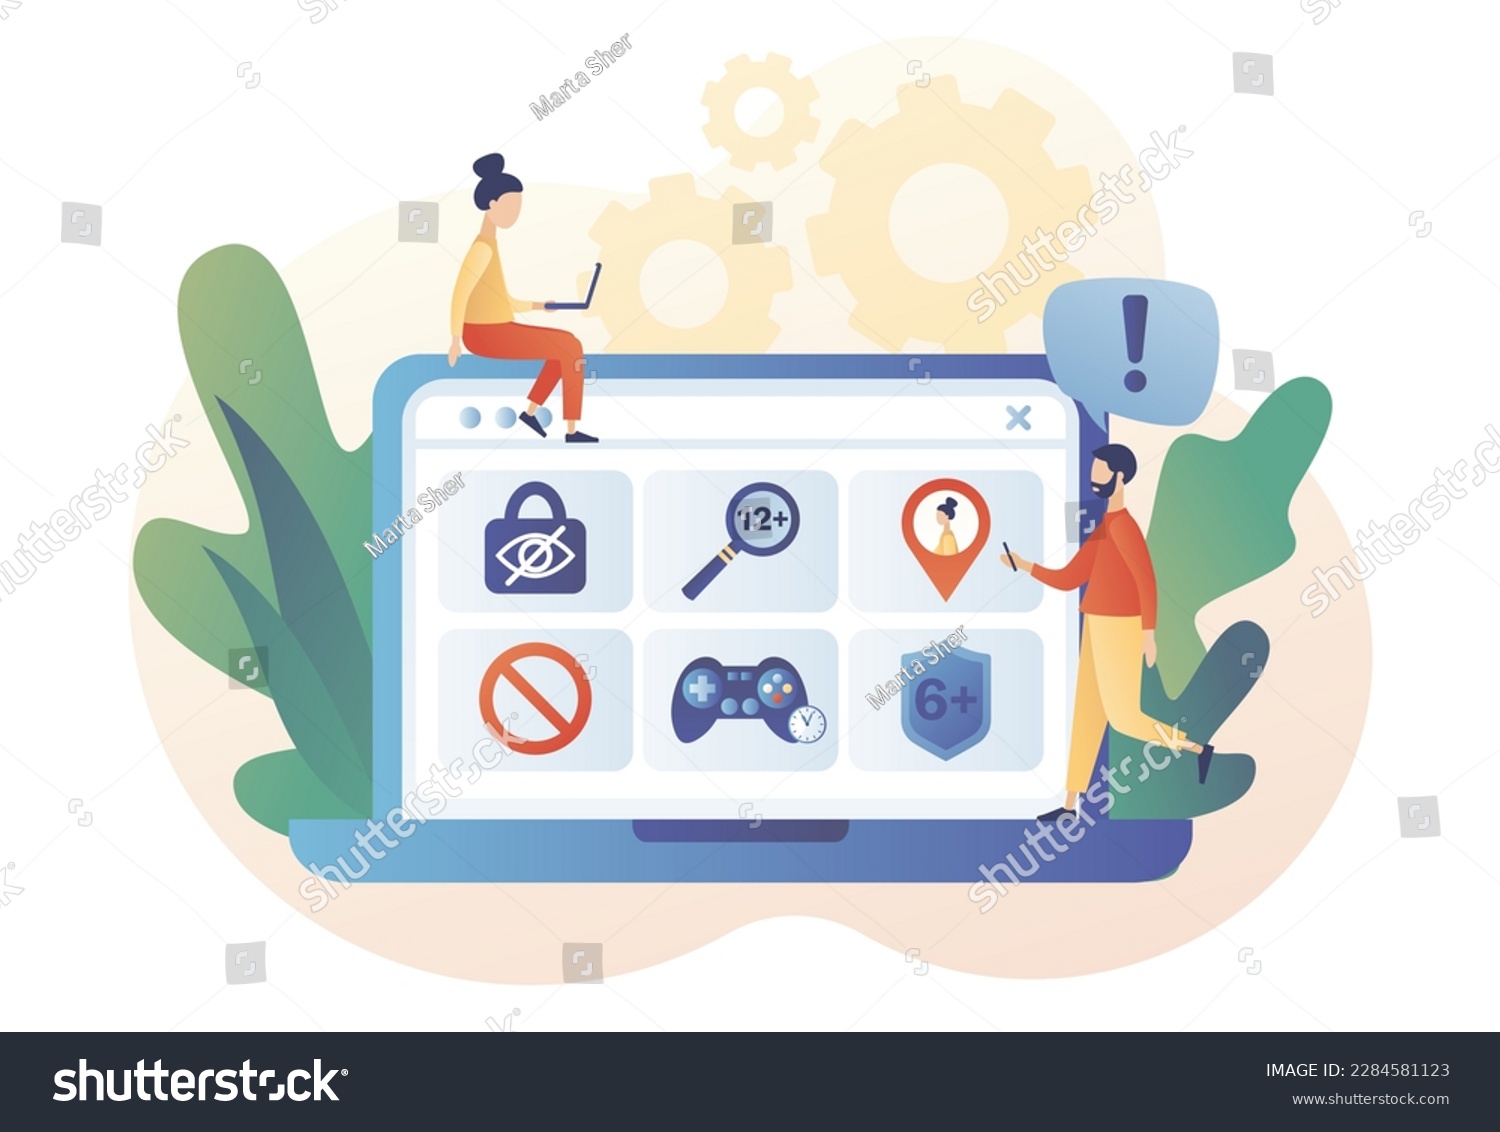 SVG of Parental control software. Age restriction, limited game time, geolocation tracking. Blocked, prohibited or inappropriate content for kids. Safe internet. Modern flat cartoon style Vector illustration svg